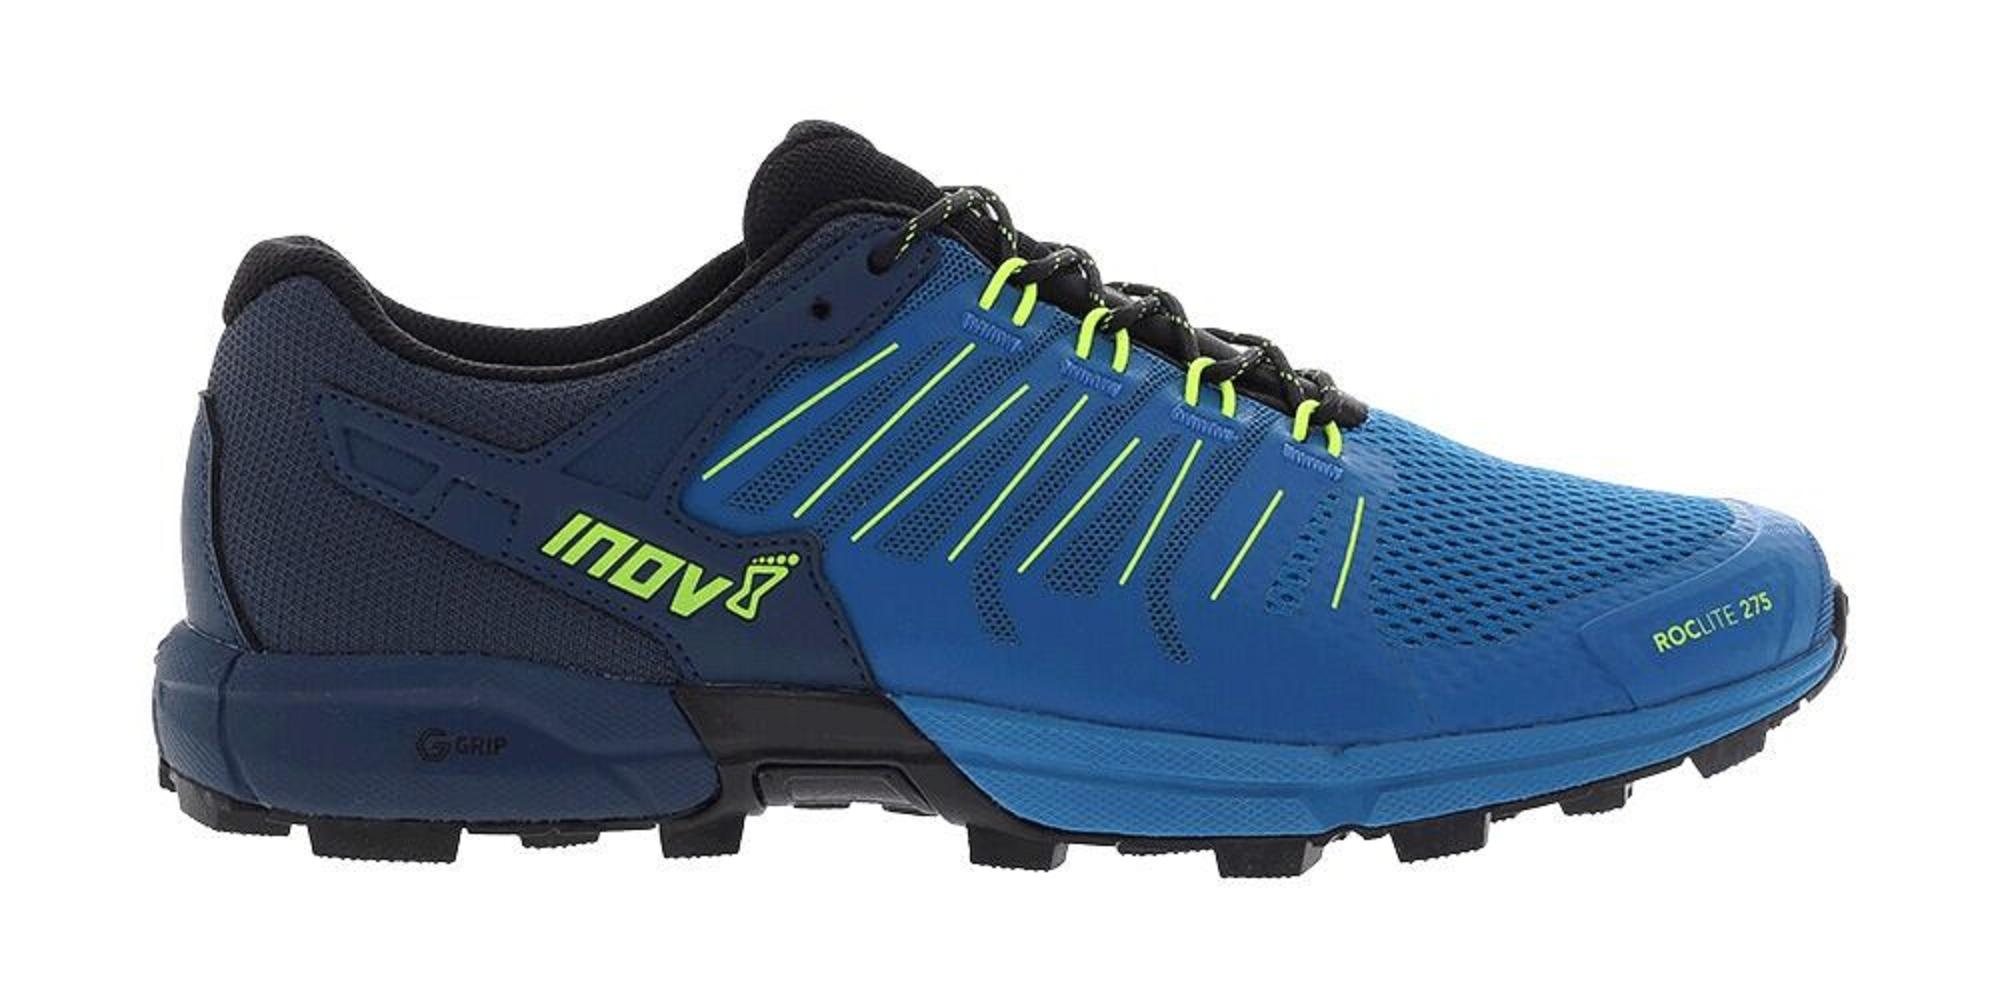 Inov-8 Shoes South Africa - Buy Crossfit Shoes South Africa